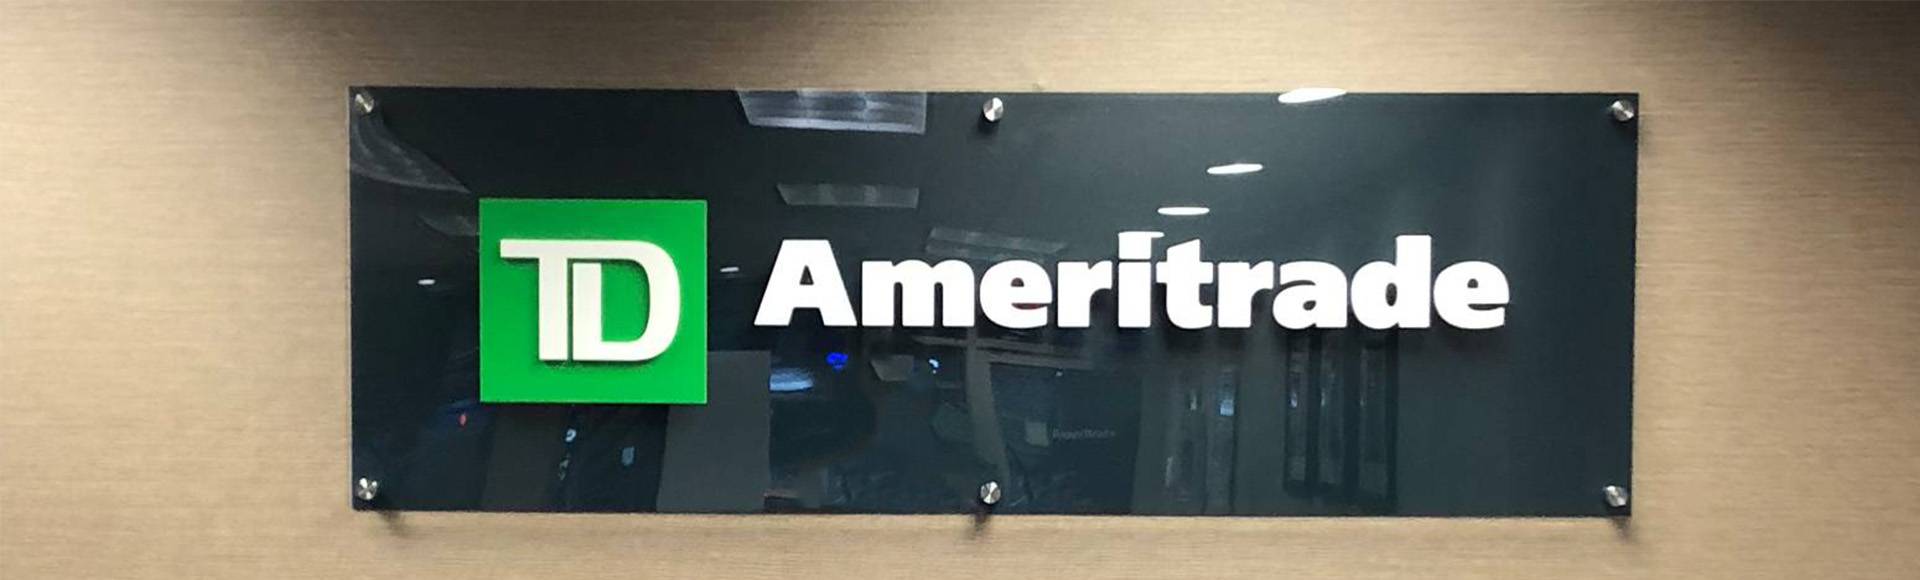 We are a full-service signage company providing holistic sign solutions for banks, brokerages, and other financial agencies in NJ and the NYC metro area